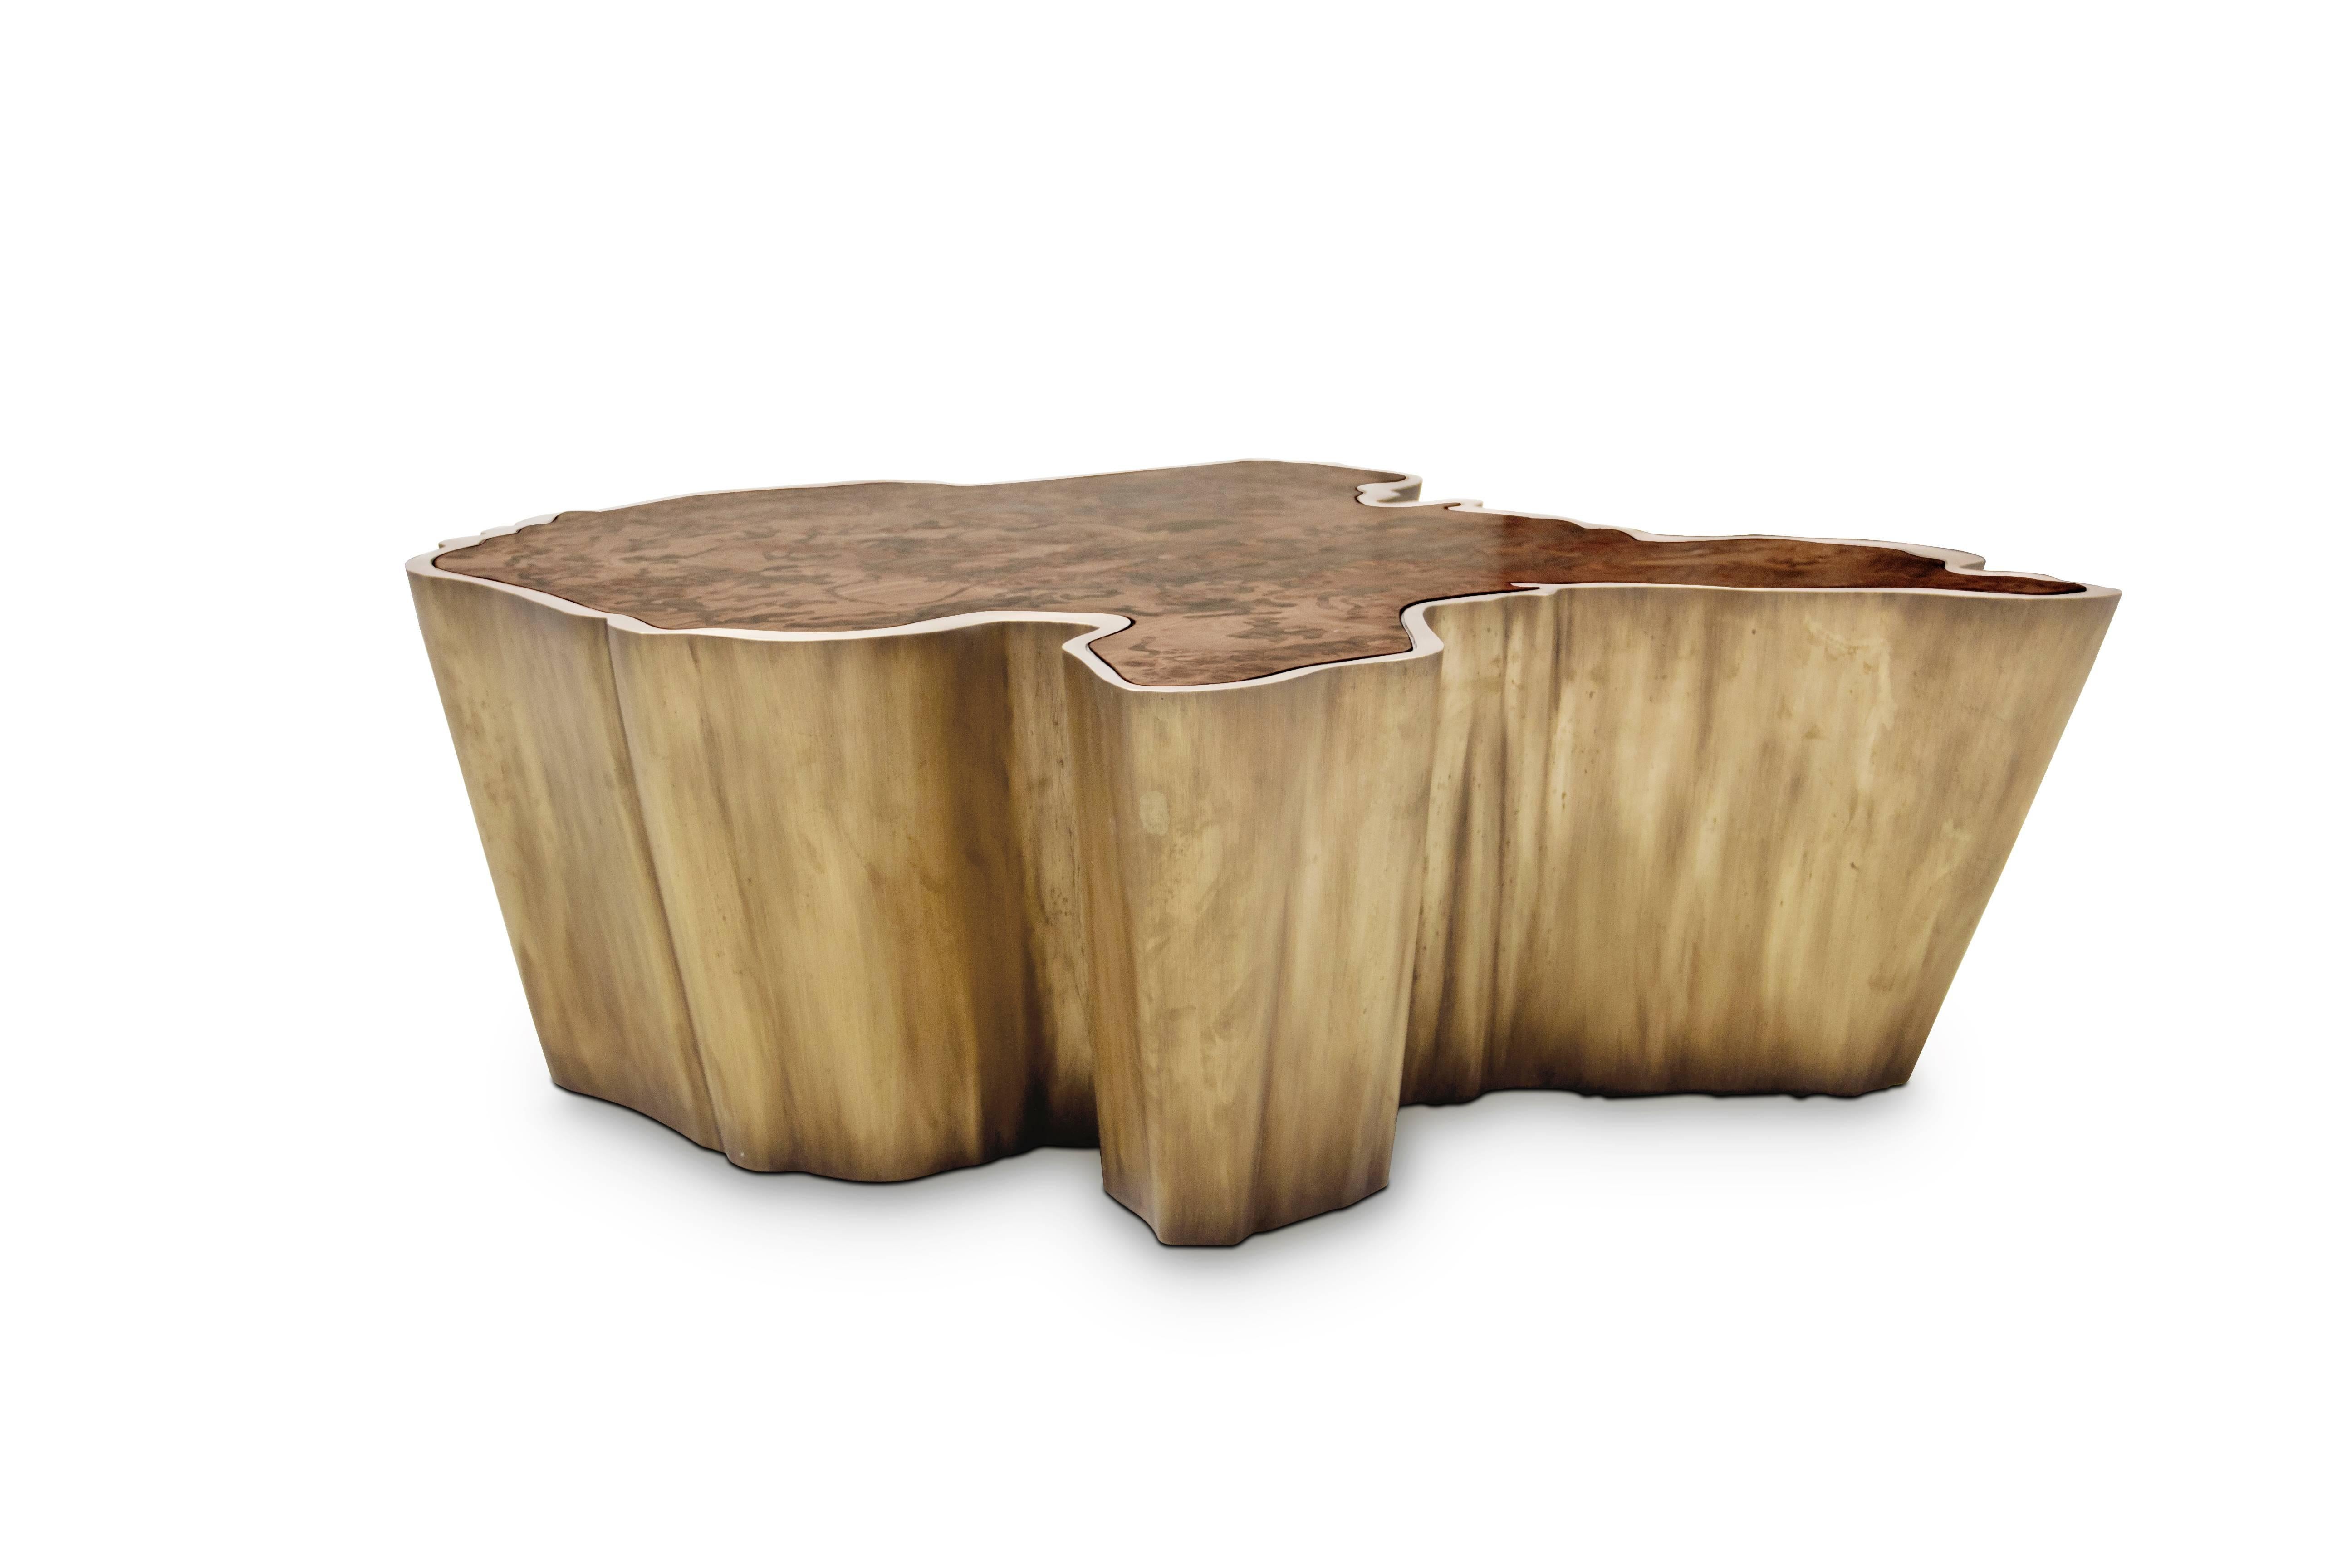 From the movie set 'Fifty Shades of Grey,' this sophisticated organic centre table featured in the penthouse's living rom. The Sequoia table's surface veneer is actually made from walnut and is meant to show the âpassage of the years,â with